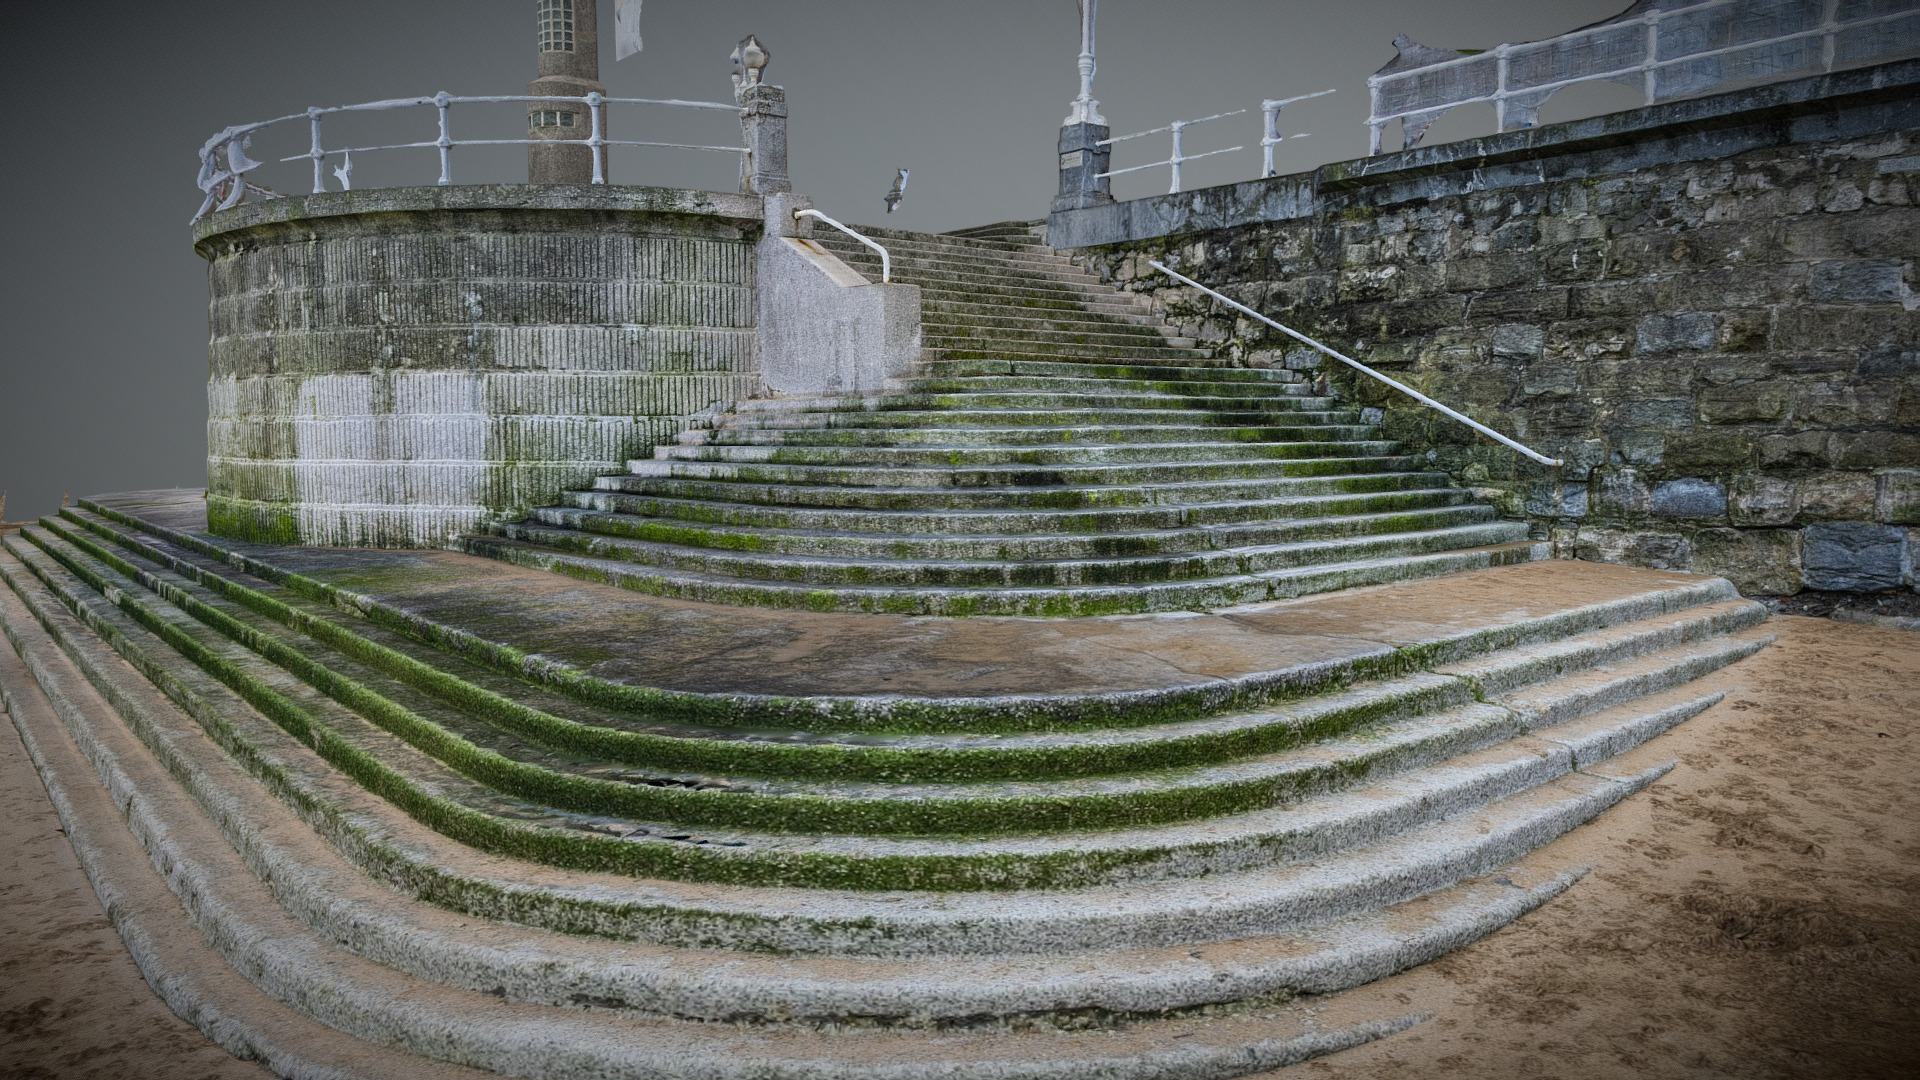 3D model Monumental beach stairs photogrammetry scan - This is a 3D model of the Monumental beach stairs photogrammetry scan. The 3D model is about a stone staircase with a stone wall.